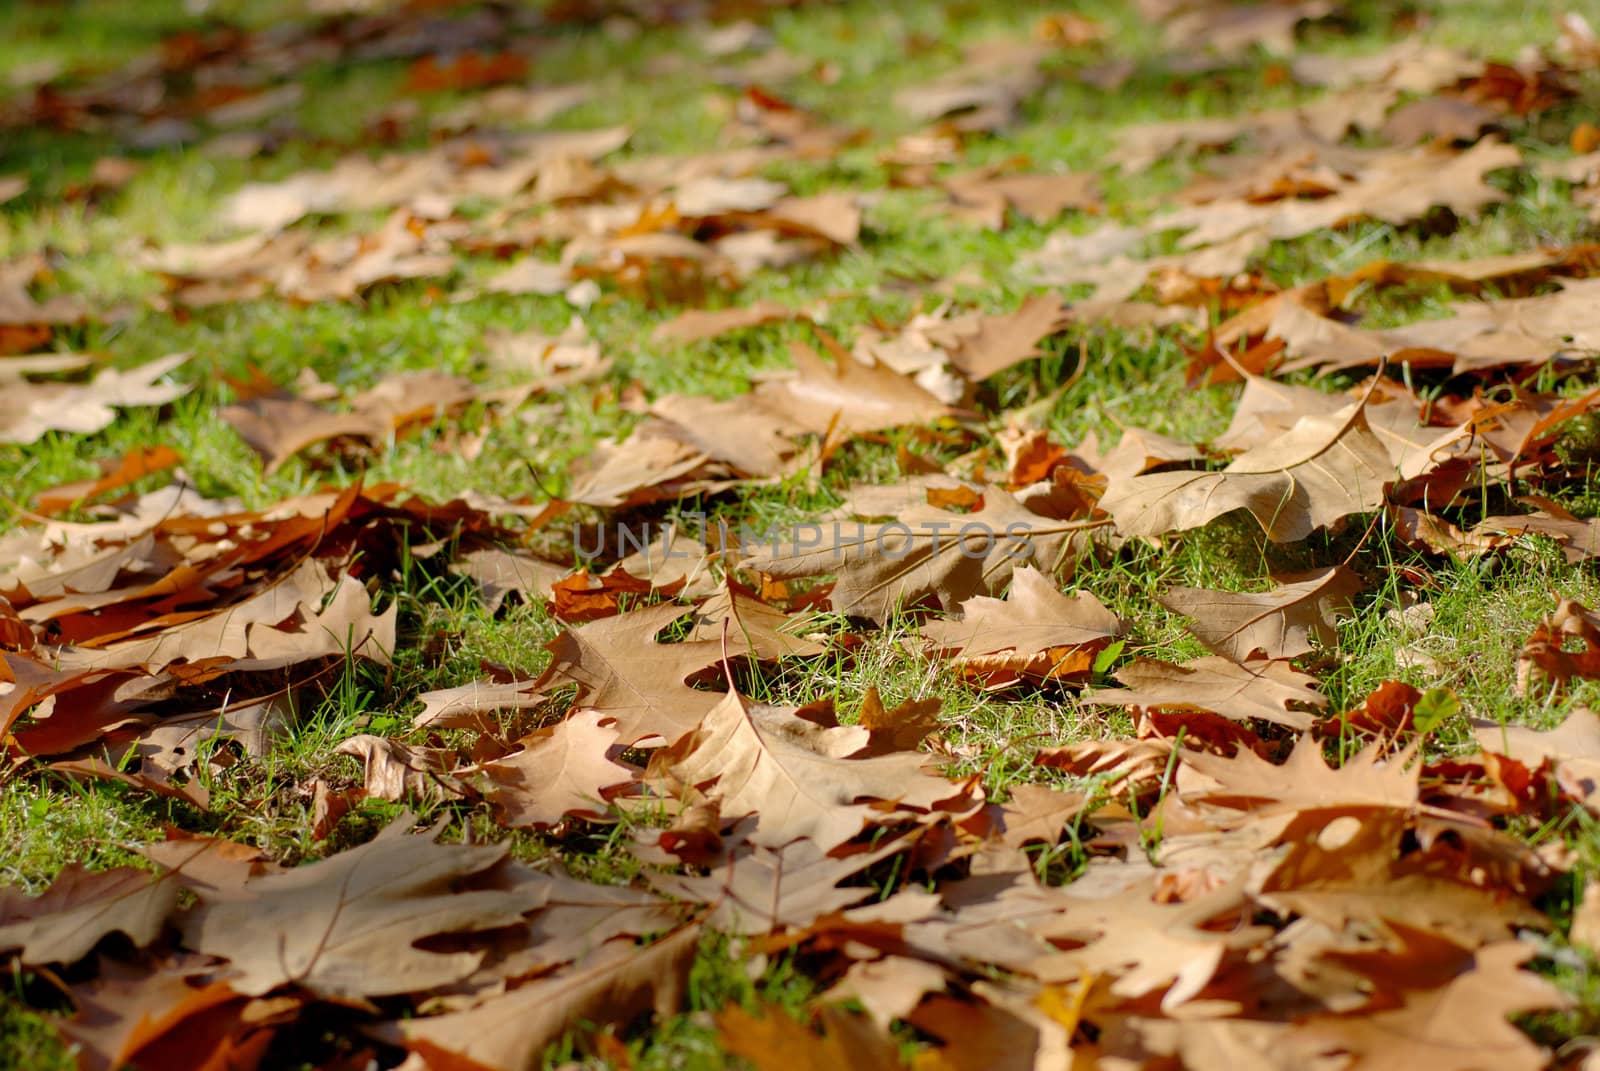 Leaves of oak scattered on the grass. Autumn season.